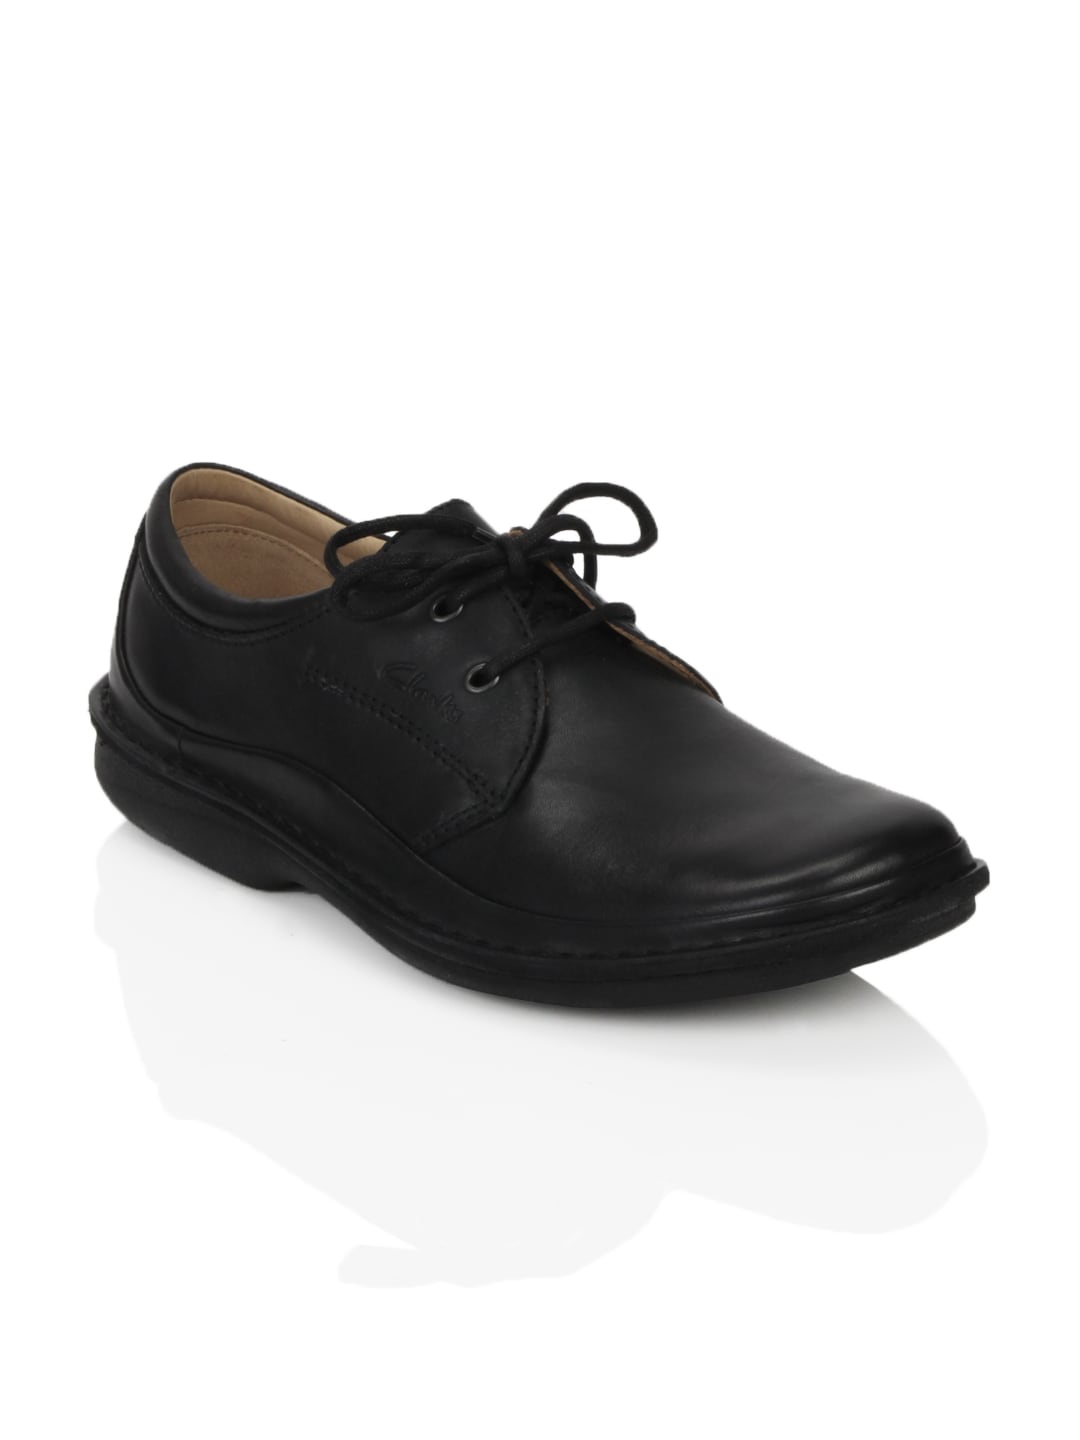 Clarks Men Sentry Cry Leather Black Shoes